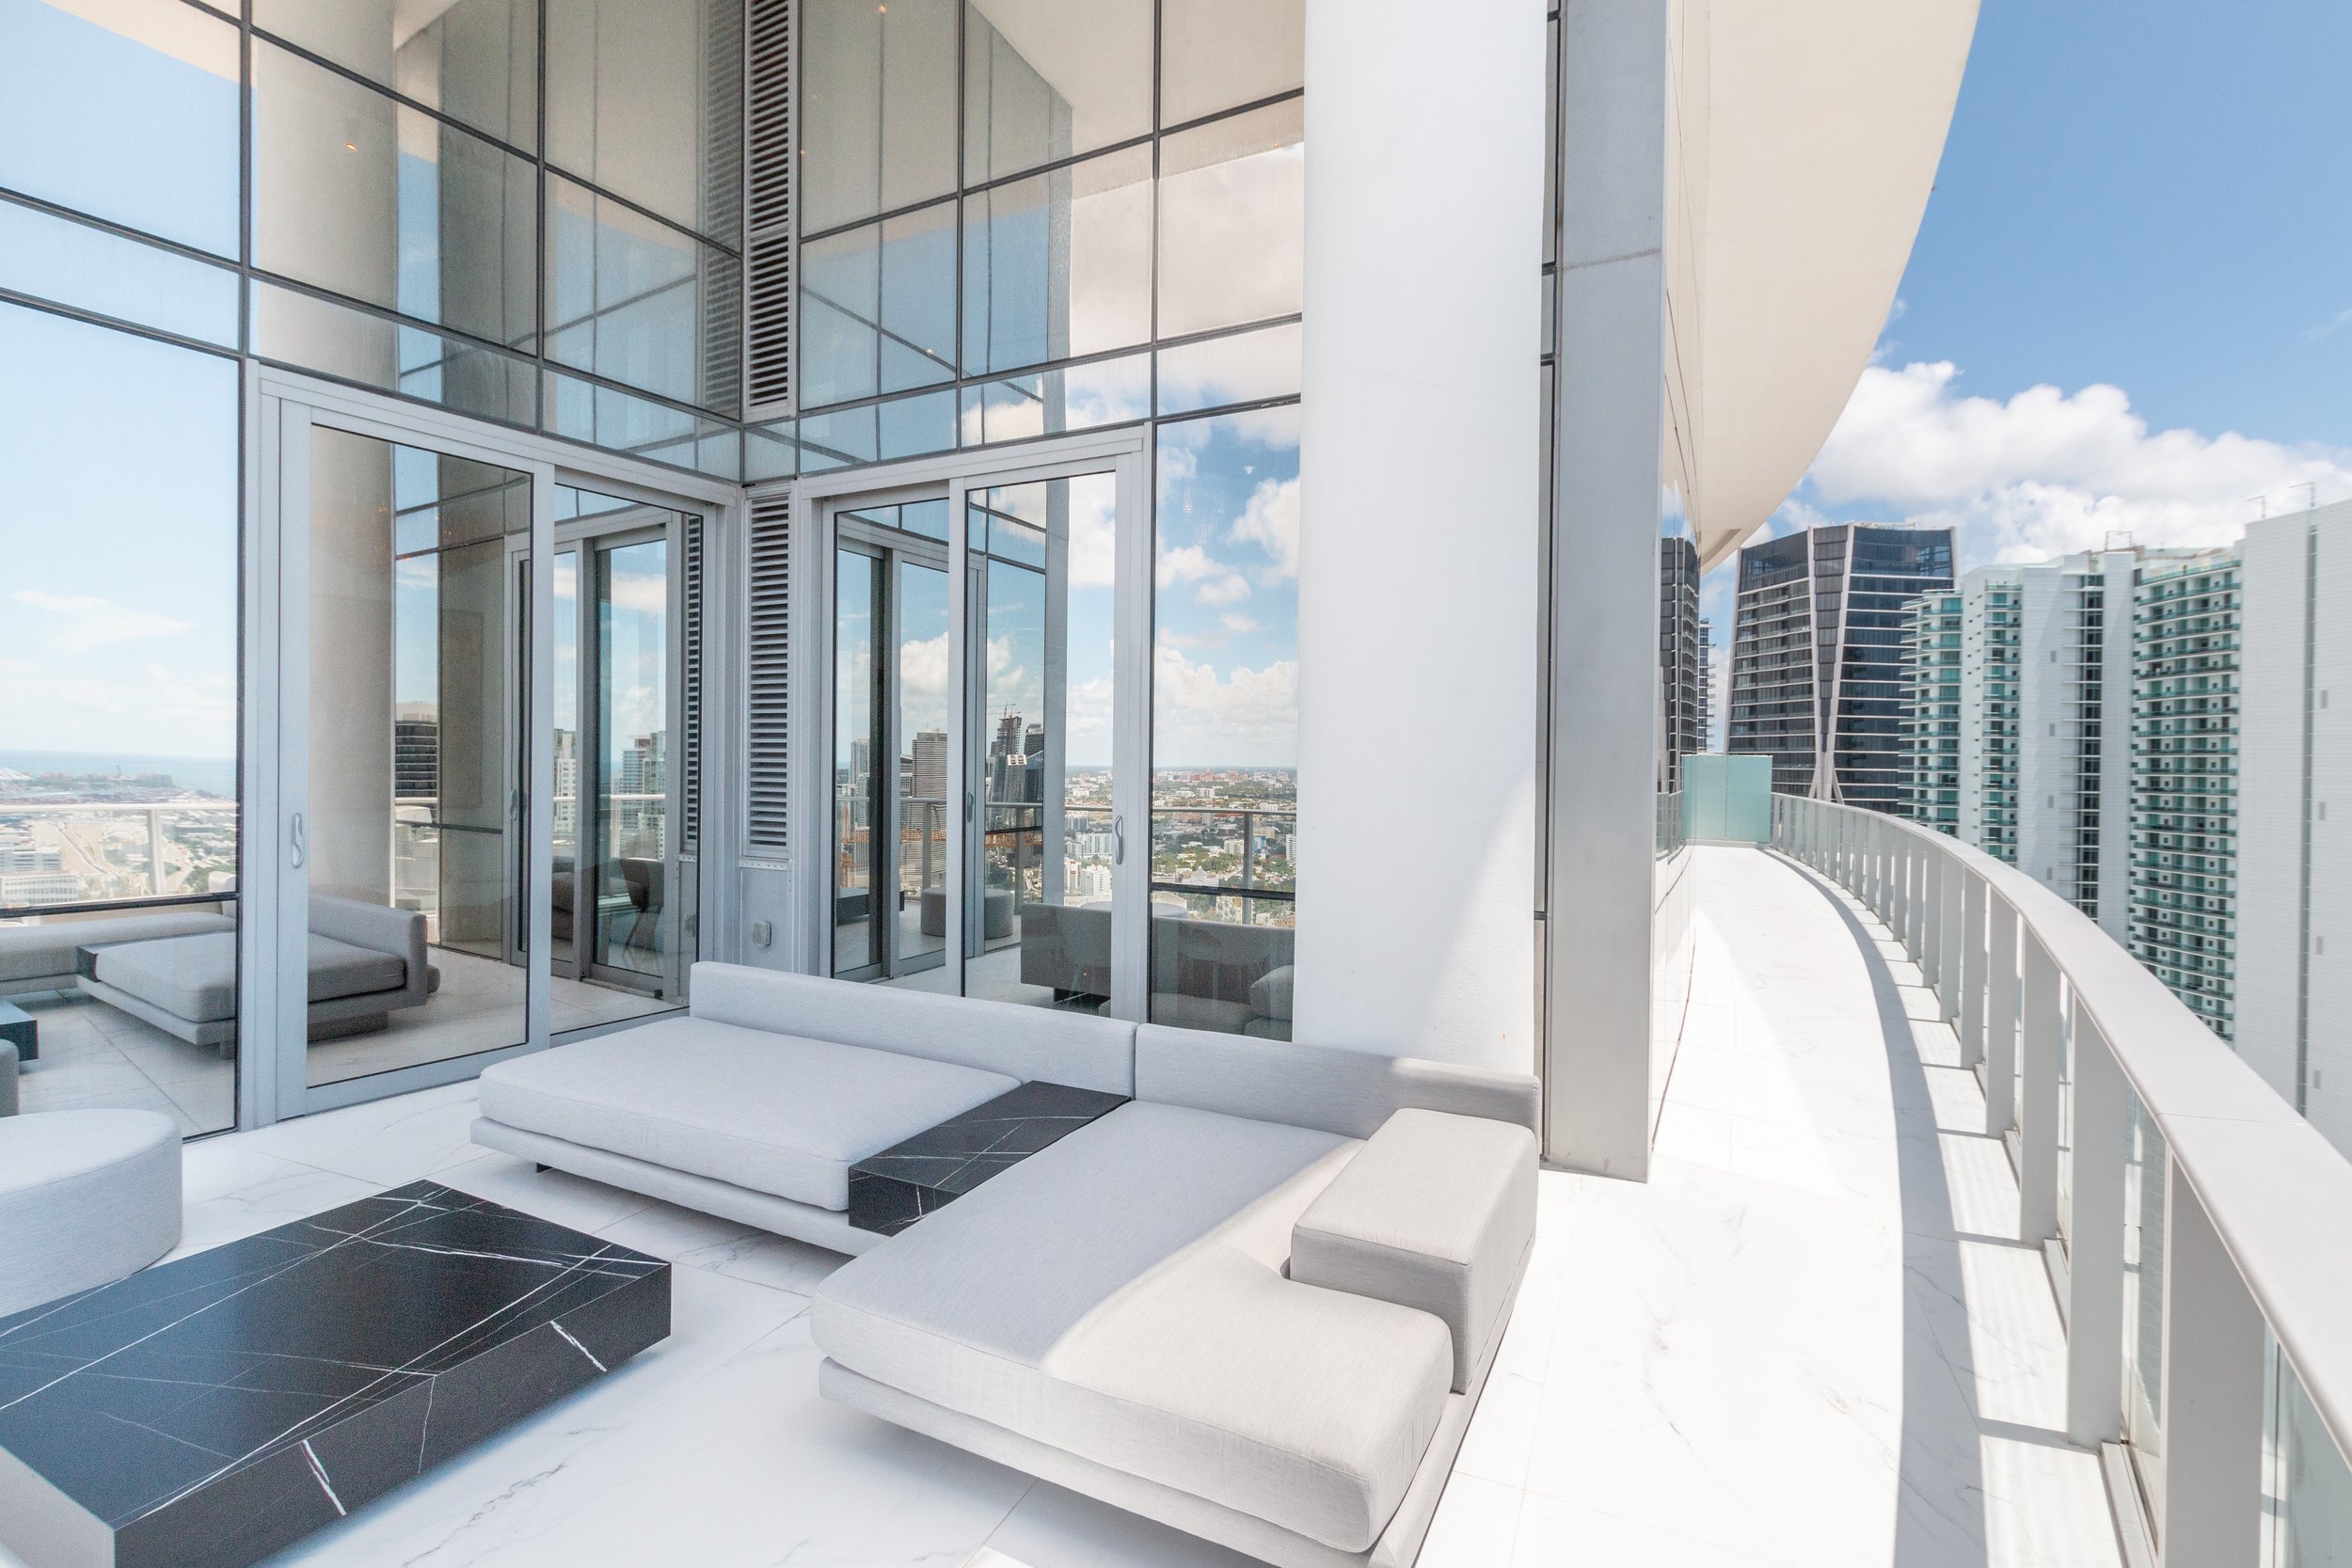 Step Inside A Sky-High Ultra-Luxe Penthouse At PARAMOUNT Miami Worldcenter For Rent Asking $40K Per Month ALTARA Properties Scott Lawrence Porter 1.35.jpg